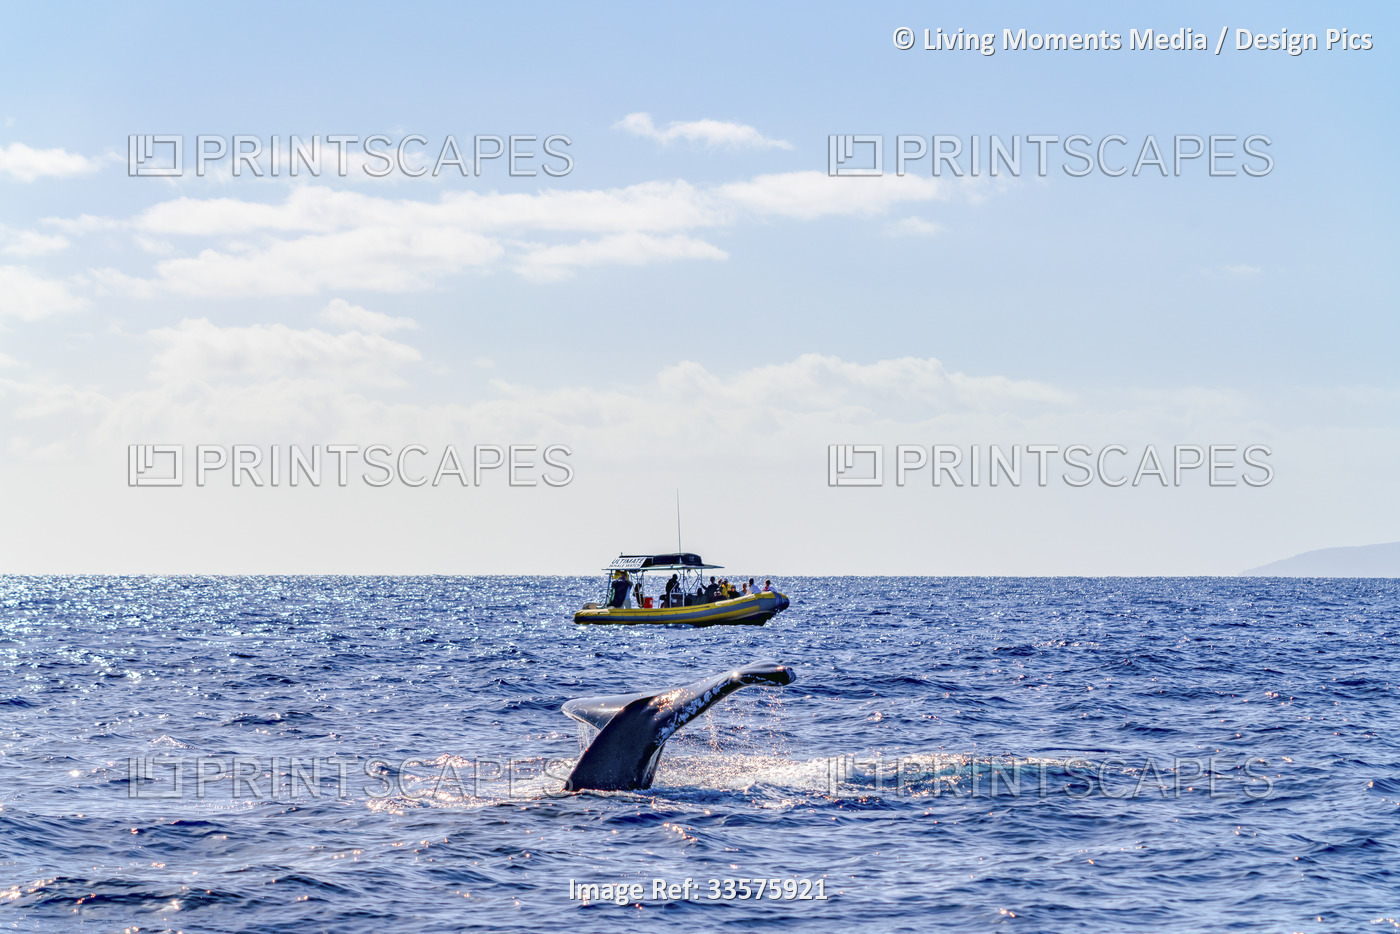 Tourists on an expedition view a whale fluke from their boat in the open ocean ...